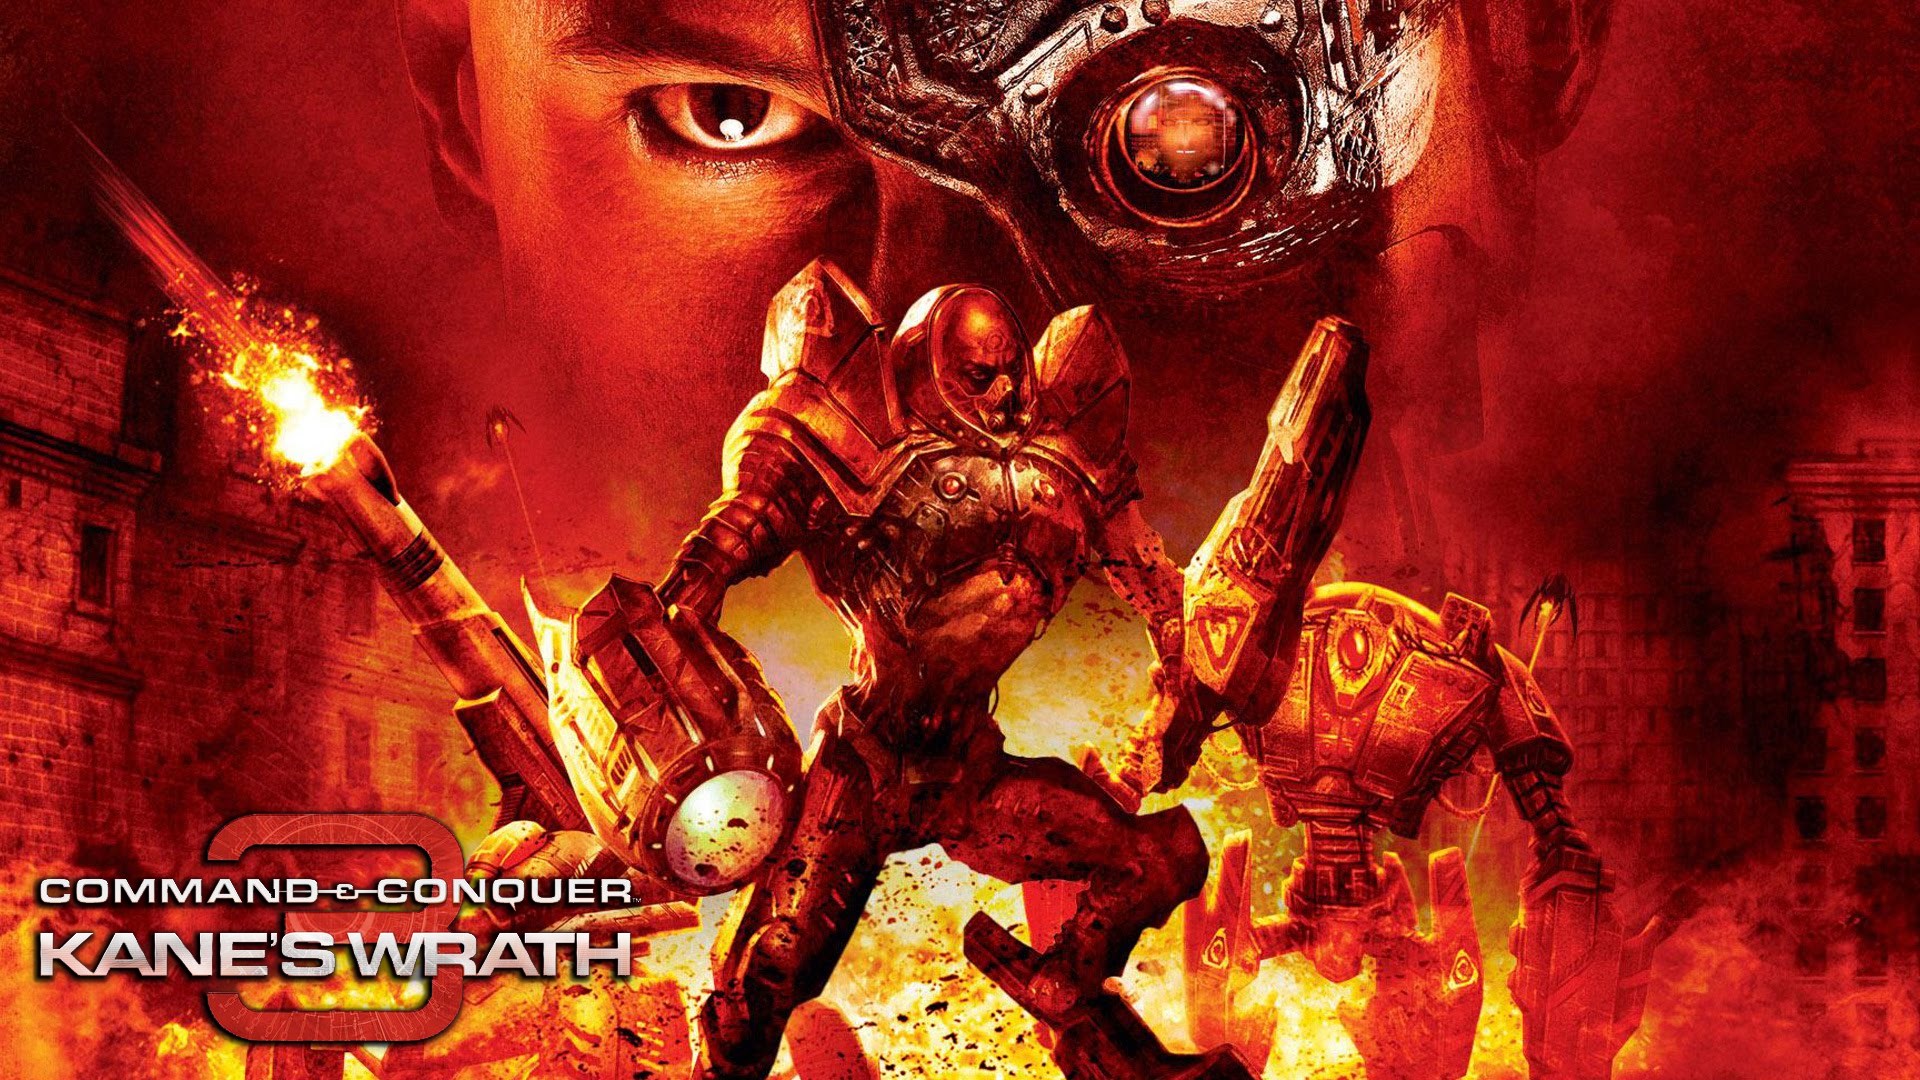 Buy Command And Conquer 3 Kane S Wrath Map Pack Microsoft Images, Photos, Reviews